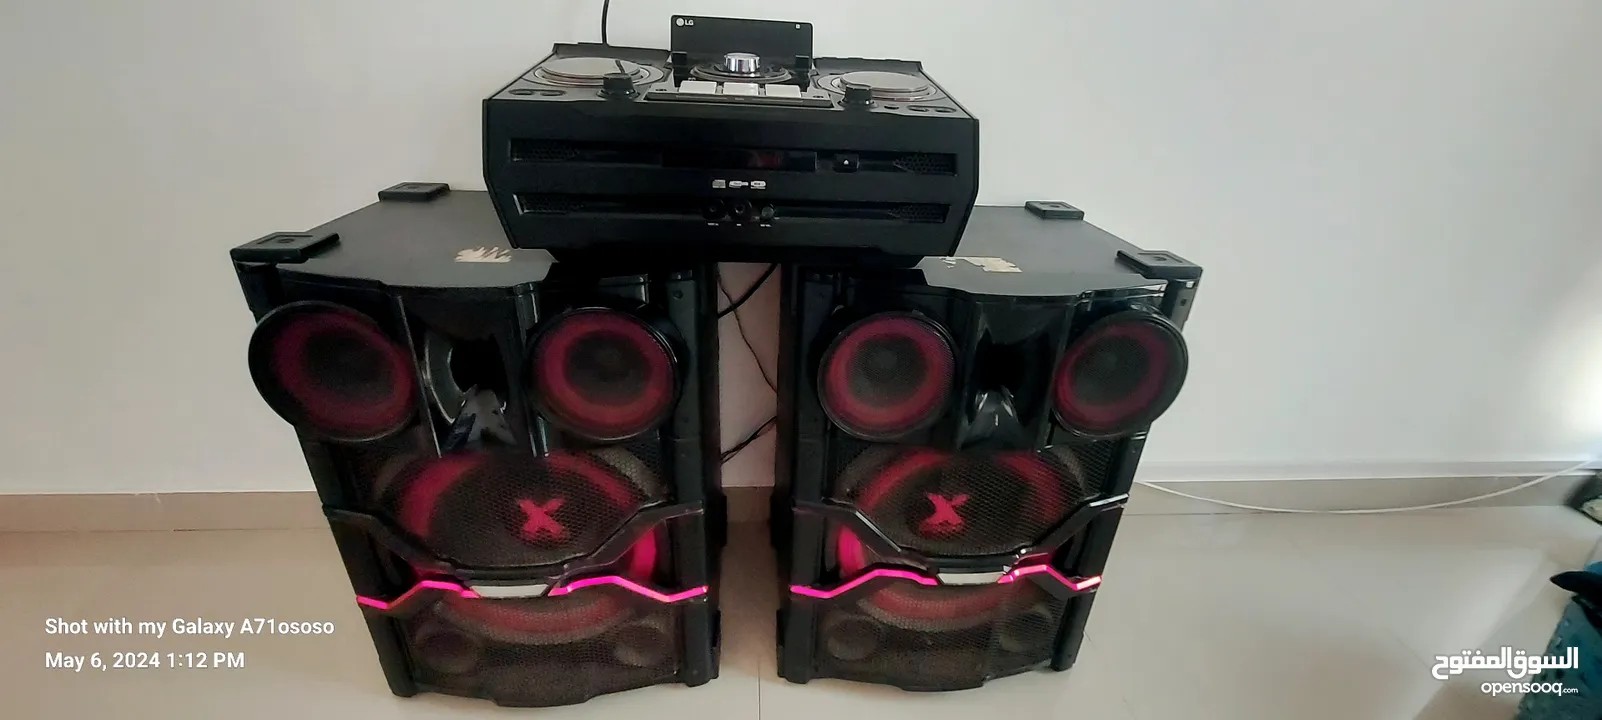 DJ speaker LG in good condition and very cheap